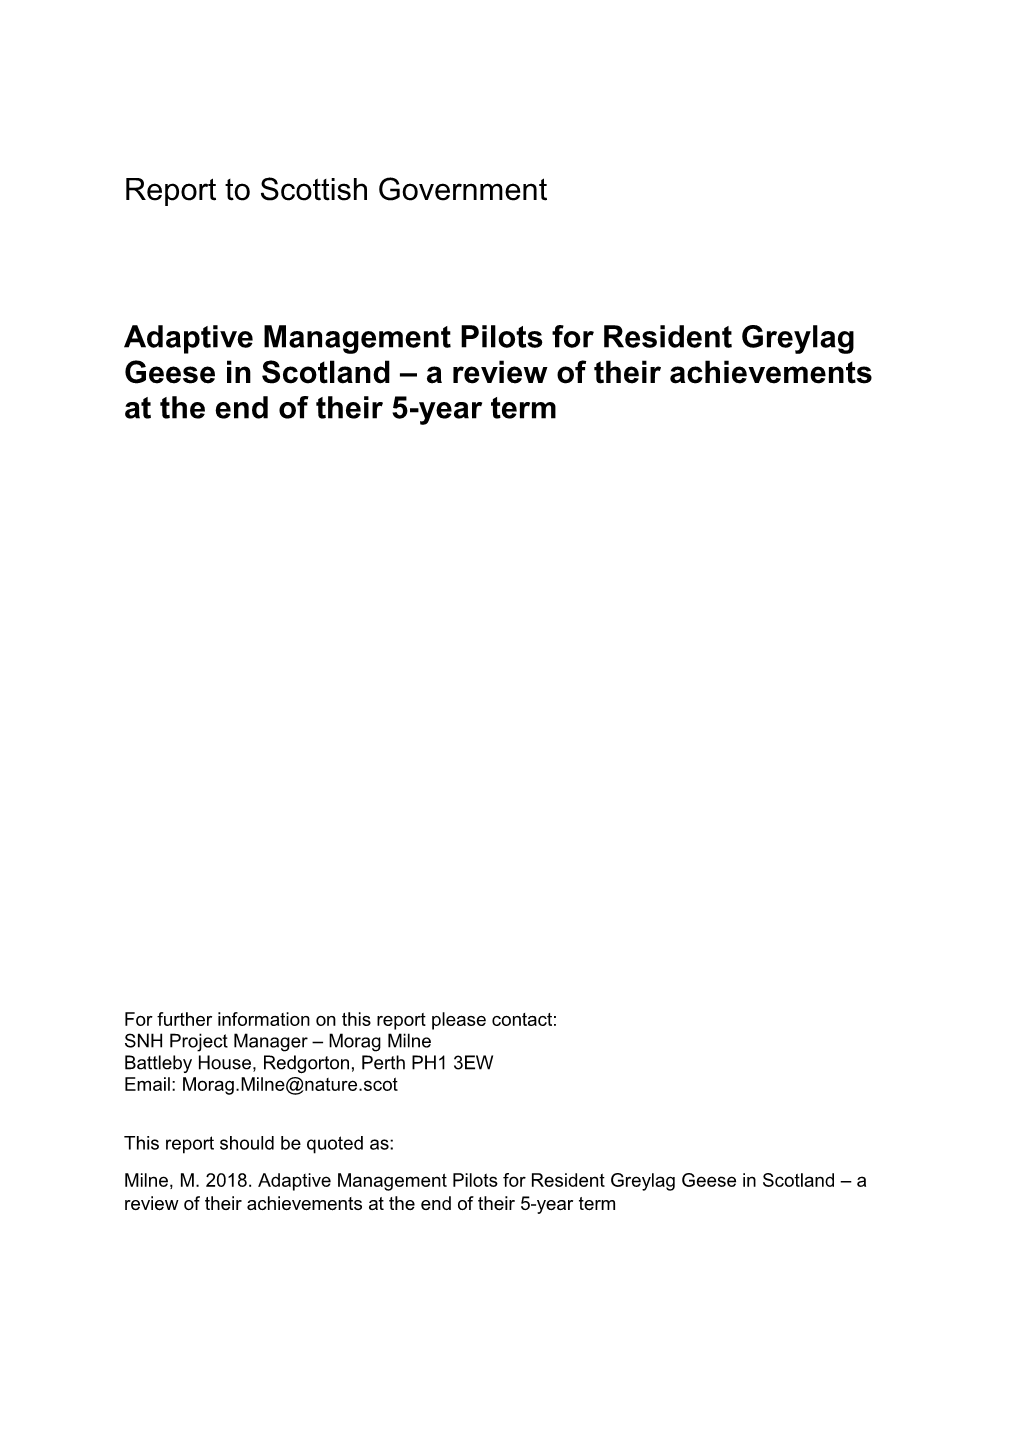 Adaptive Management Pilots for Resident Greylag Geese in Scotland – a Review of Their Achievements at the End of Their 5-Year Term